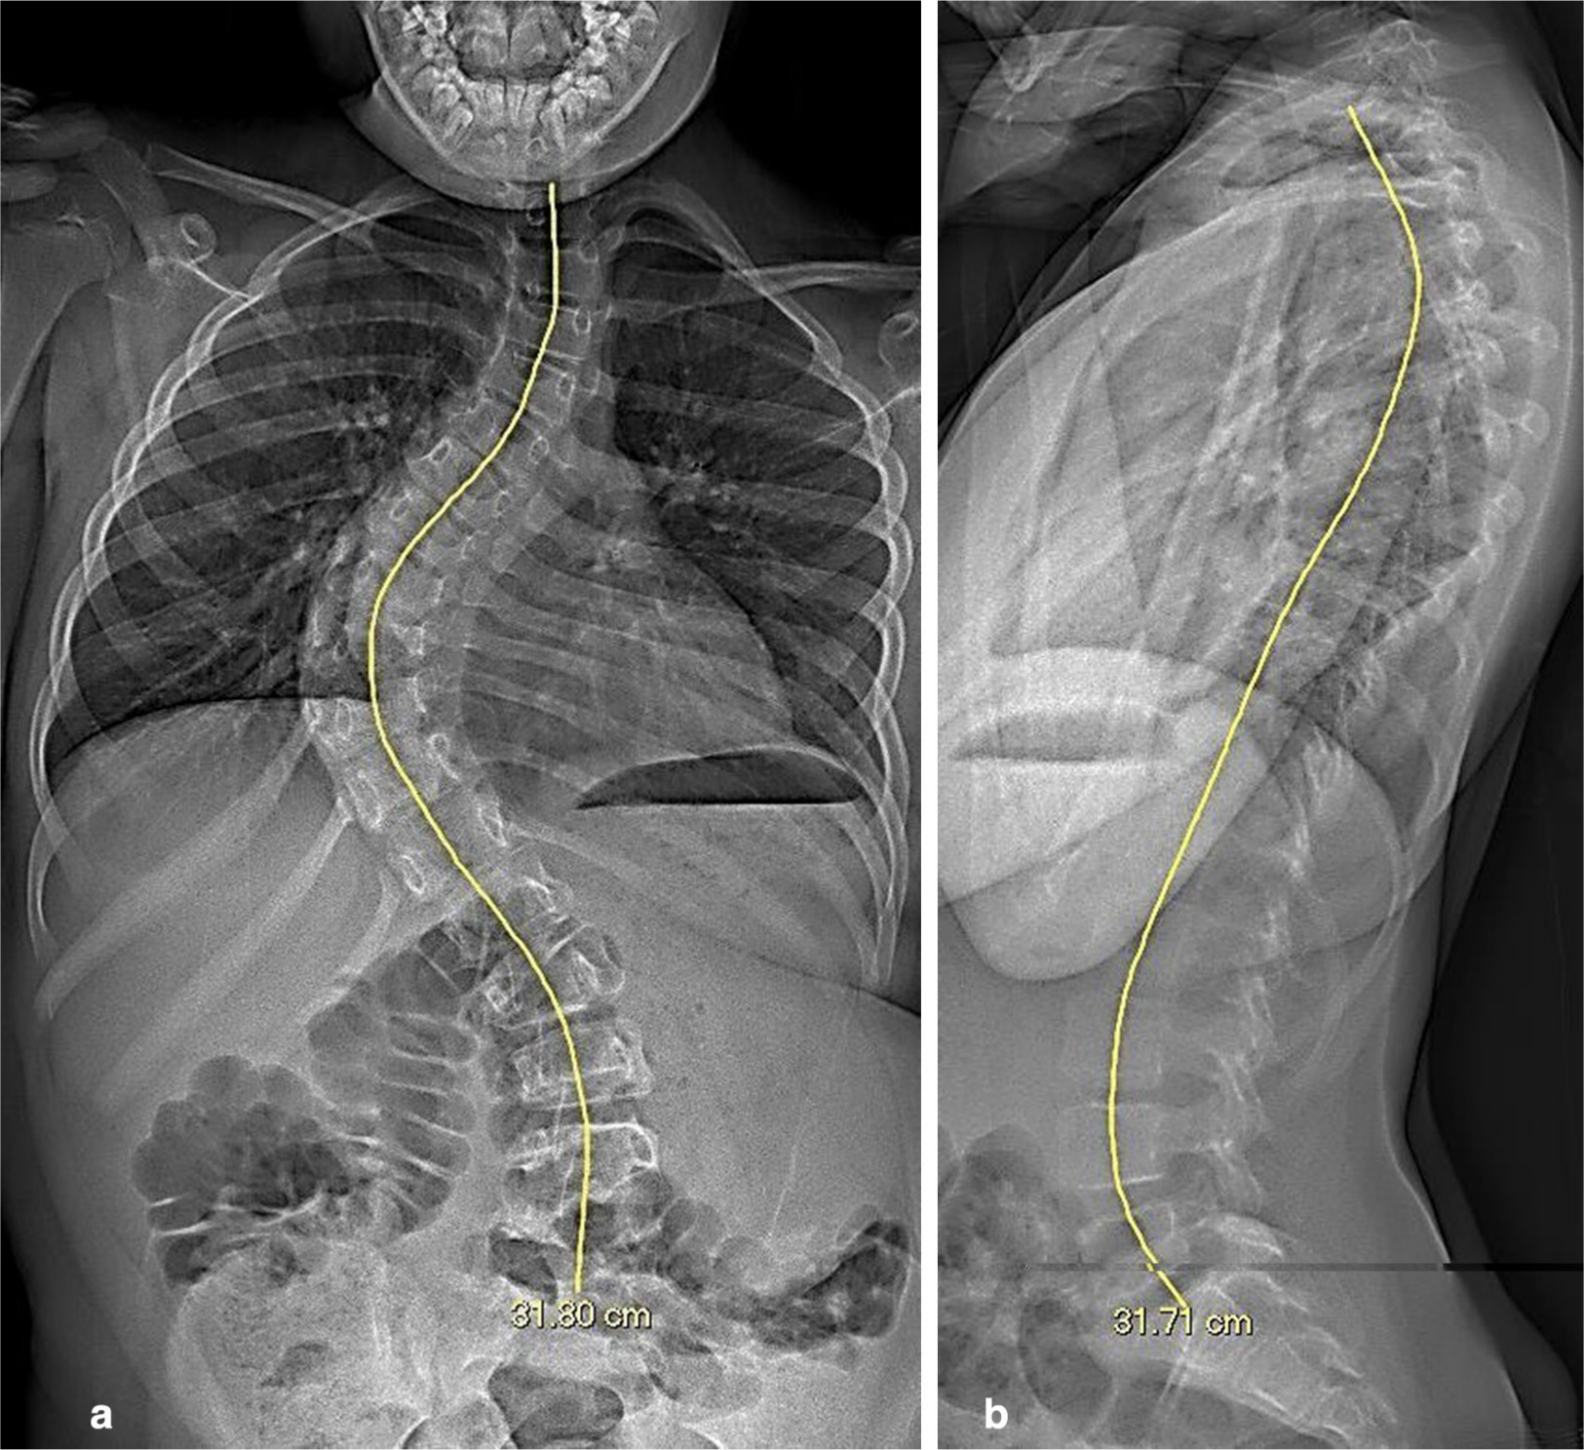 Fig. 1 
            a) Pre-operative coronal view radiograph with T1-S1 measurement. b) Pre-operative sagittal view radiograph with T1-S1 measurement.
          